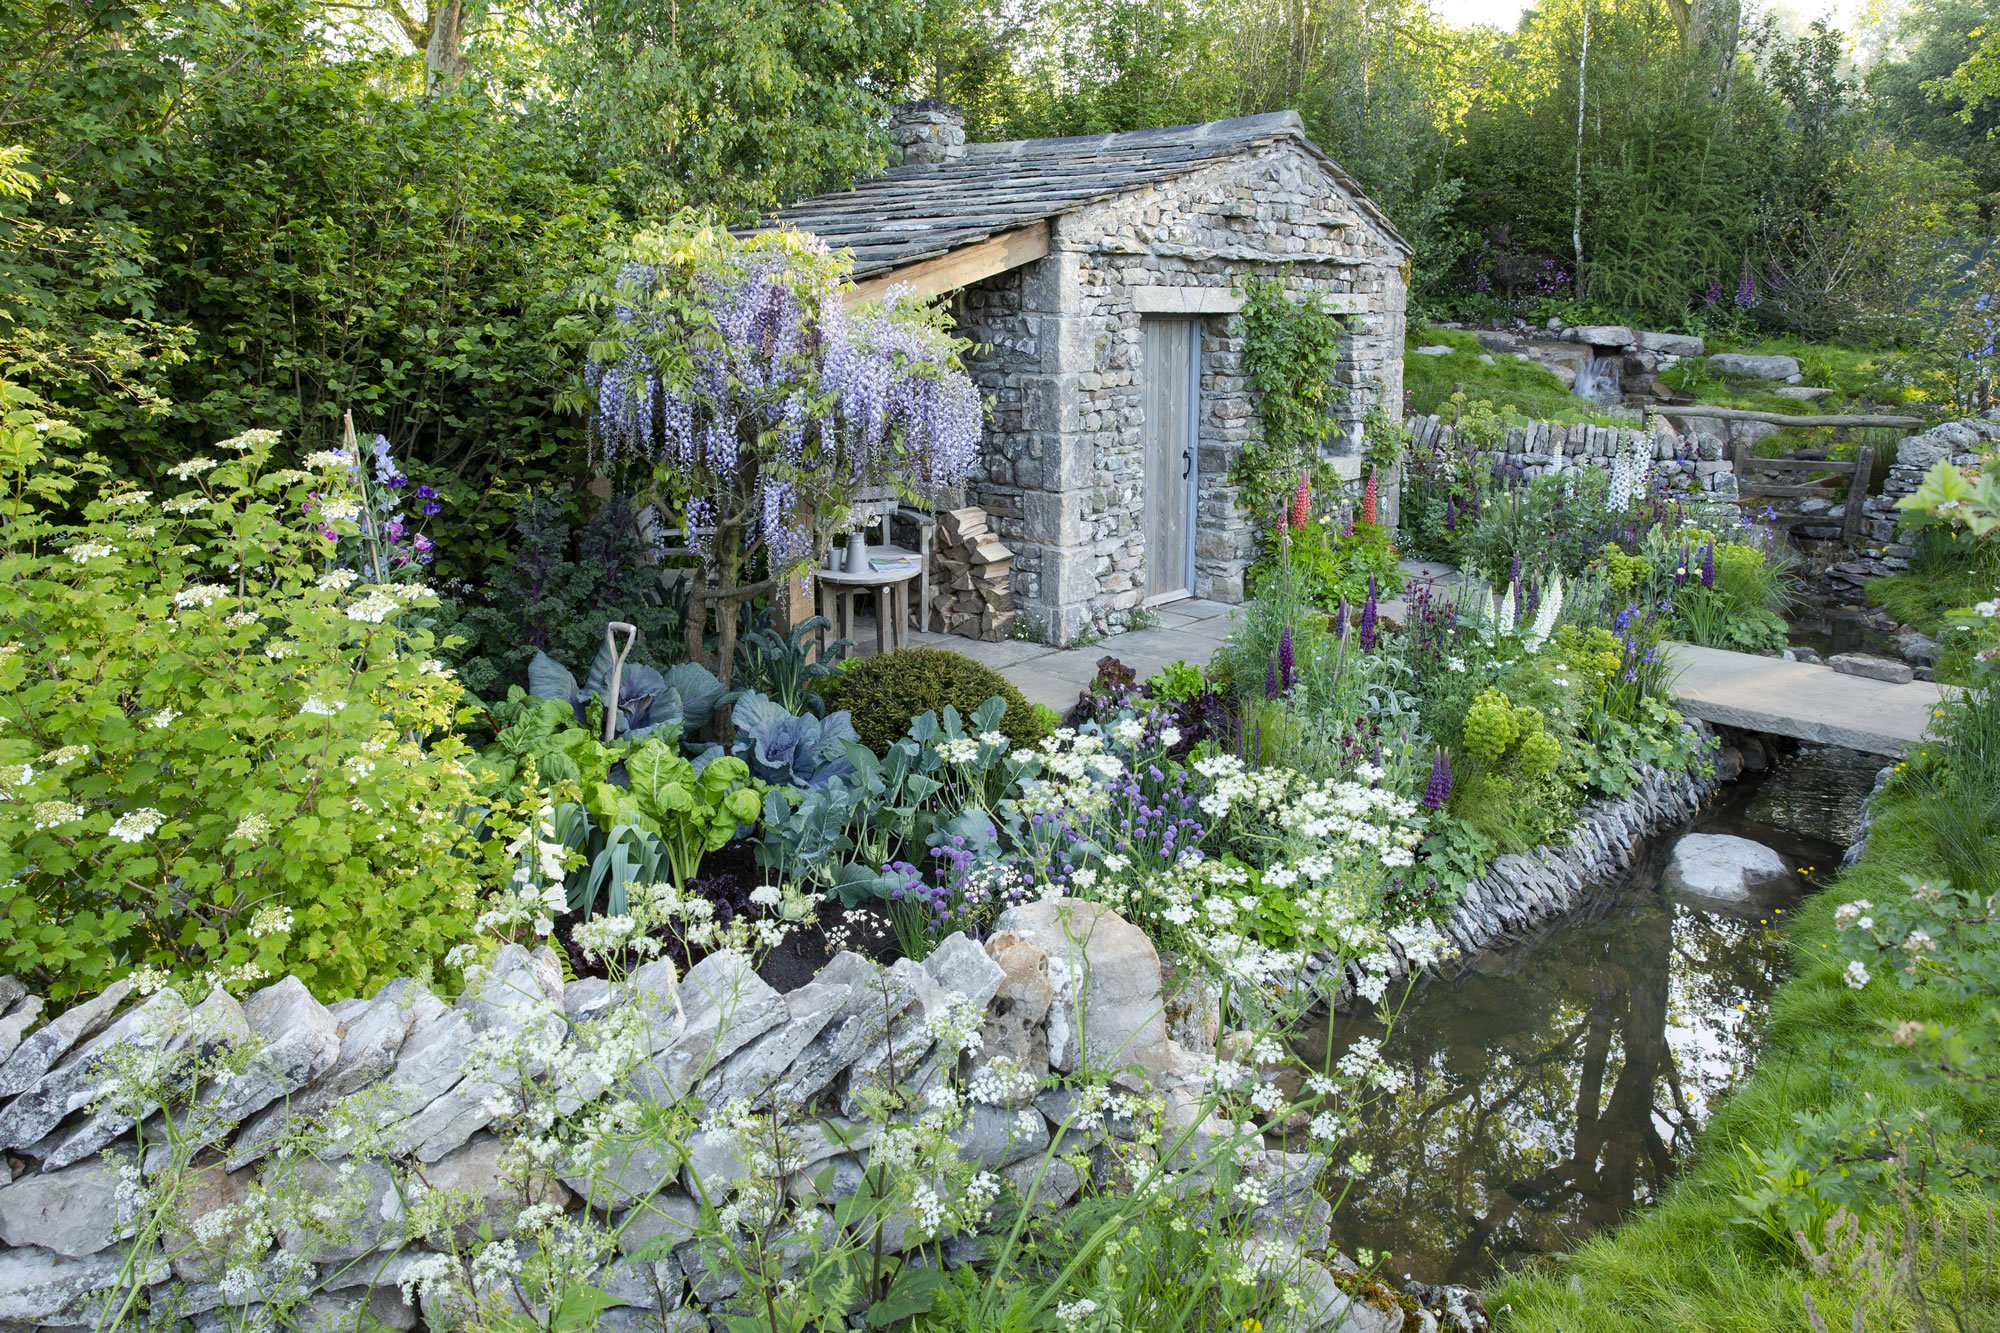 Image name wtylandformchelsea19 1 the 1 image from the post <strong>Welcome to Yorkshire Chelsea Garden Wins BBC RHS People’s Choice Award as Garden of the Decade </strong> in Yorkshire.com.